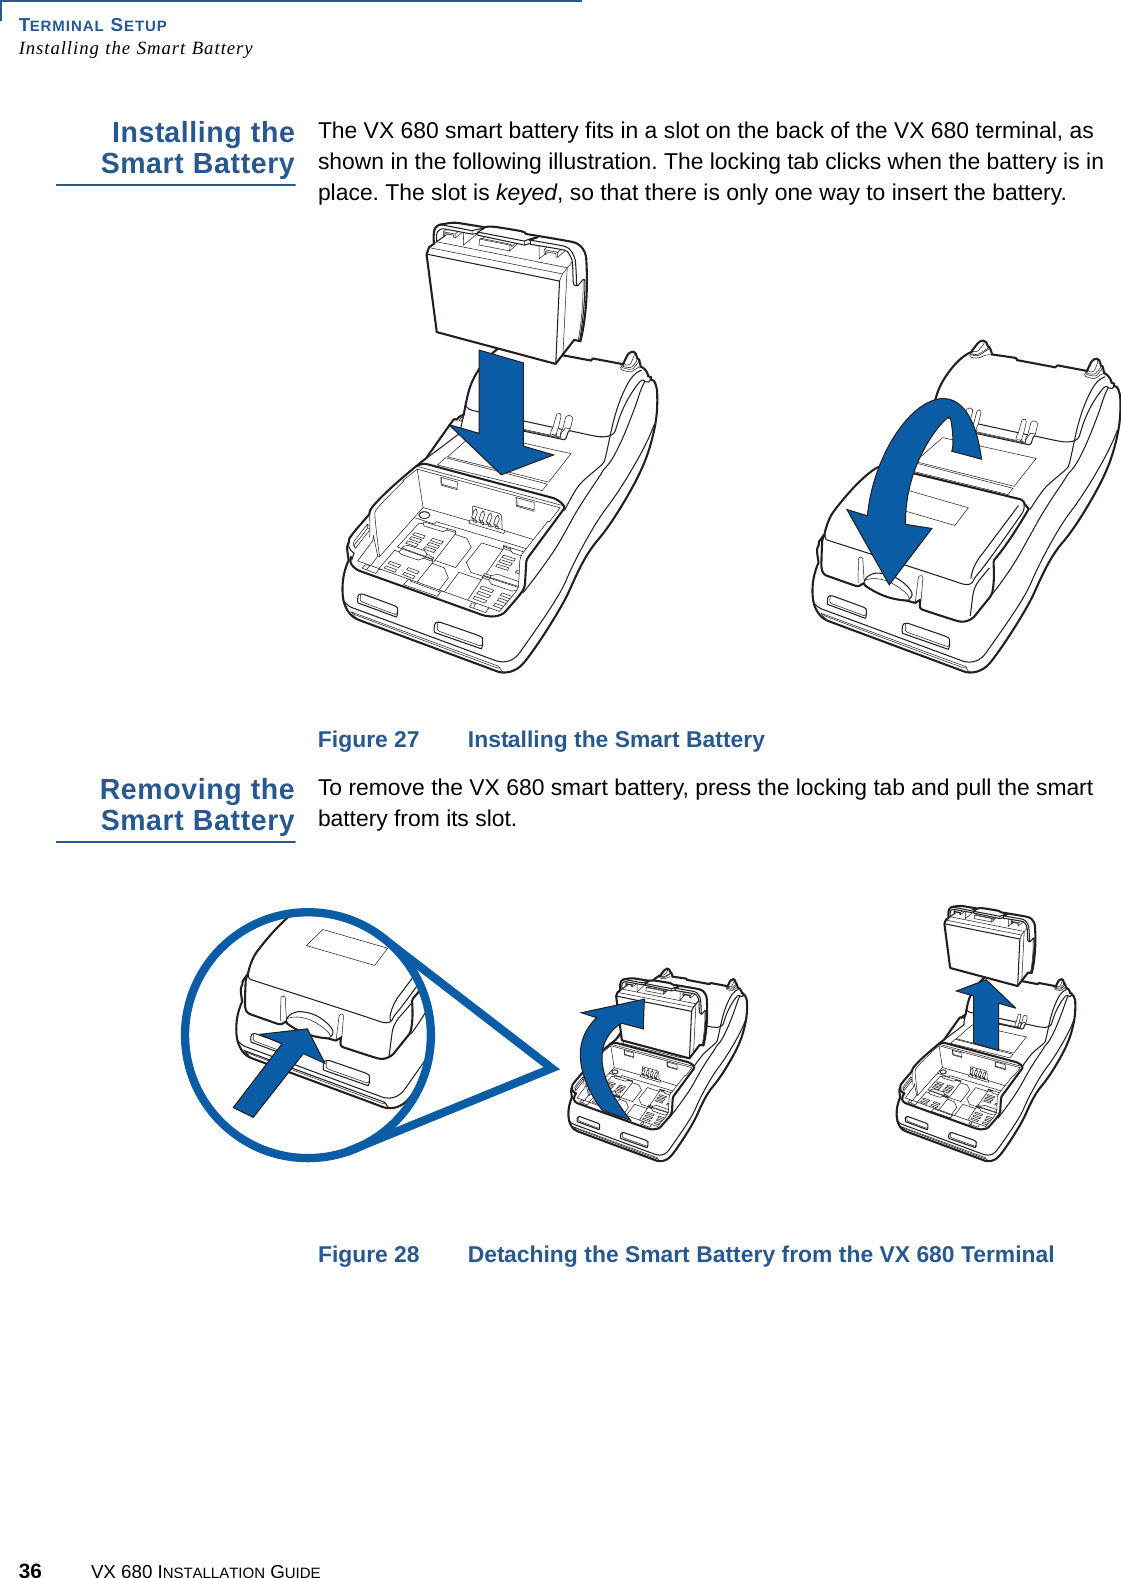 TERMINAL SETUPInstalling the Smart Battery36 VX 680 INSTALLATION GUIDEInstalling theSmart BatteryThe VX 680 smart battery fits in a slot on the back of the VX 680 terminal, as shown in the following illustration. The locking tab clicks when the battery is in place. The slot is keyed, so that there is only one way to insert the battery.Figure 27 Installing the Smart Battery Removing theSmart BatteryTo remove the VX 680 smart battery, press the locking tab and pull the smart battery from its slot.Figure 28 Detaching the Smart Battery from the VX 680 Terminal